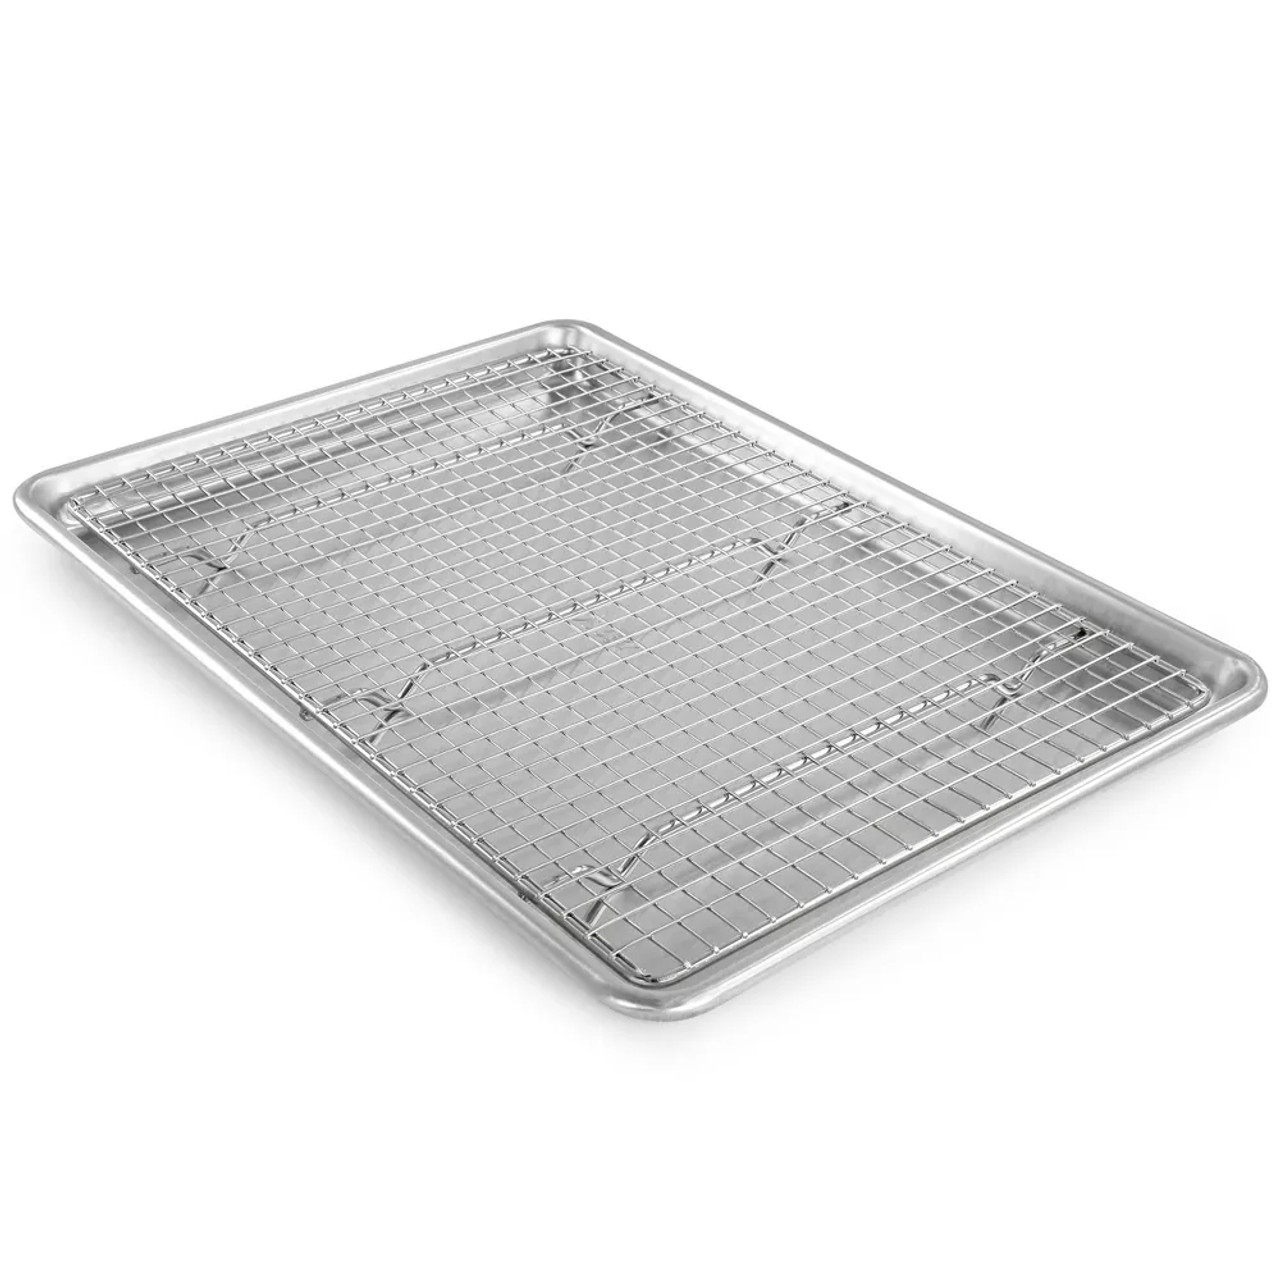 Oster Baker's Glee Stainless Steel 13in Cookie Sheet and 12in Cooling Rack Bakeware Set in Silver